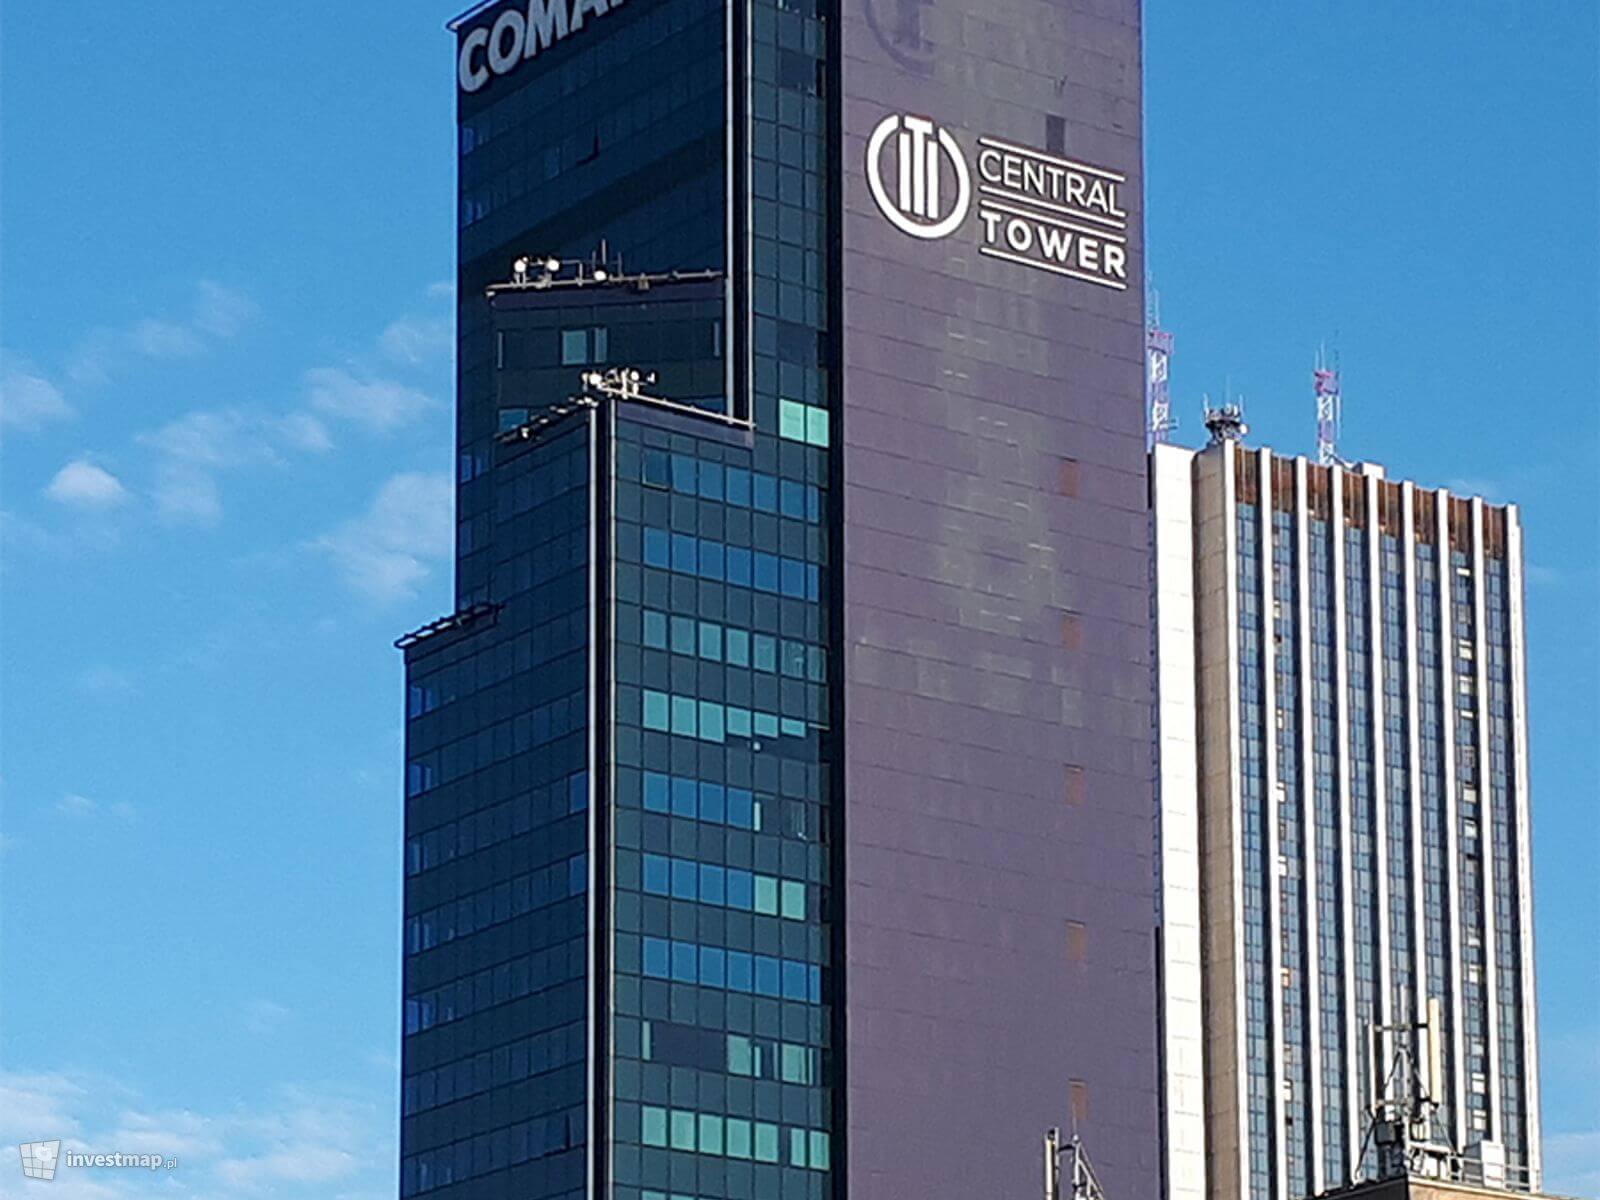 Central Tower